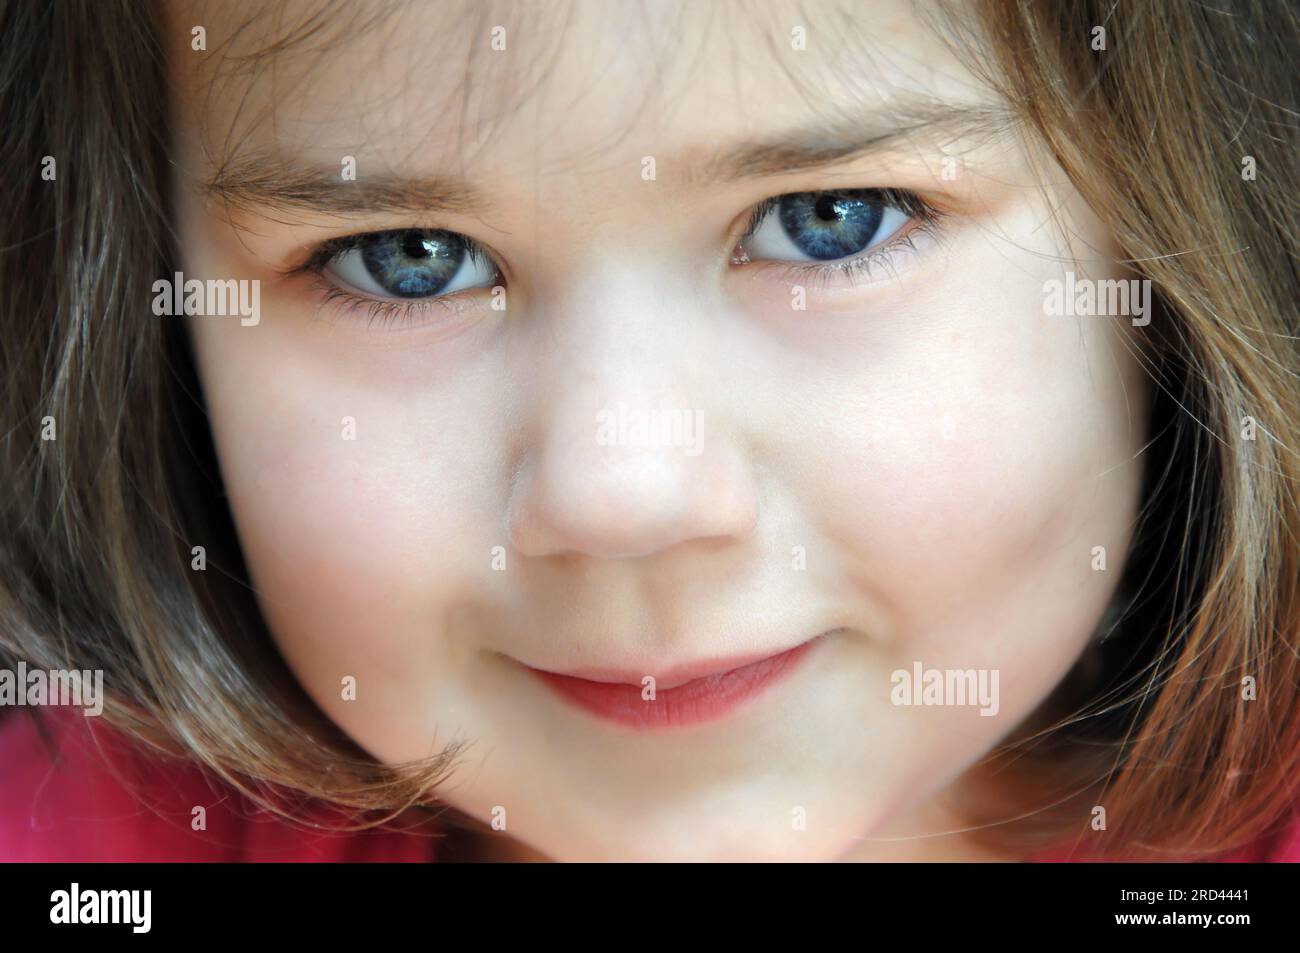 'Eyes of the Soul' are shown in this cropped closeup of a little girl's face.  She is giving an impish smile as she looks up. Stock Photo